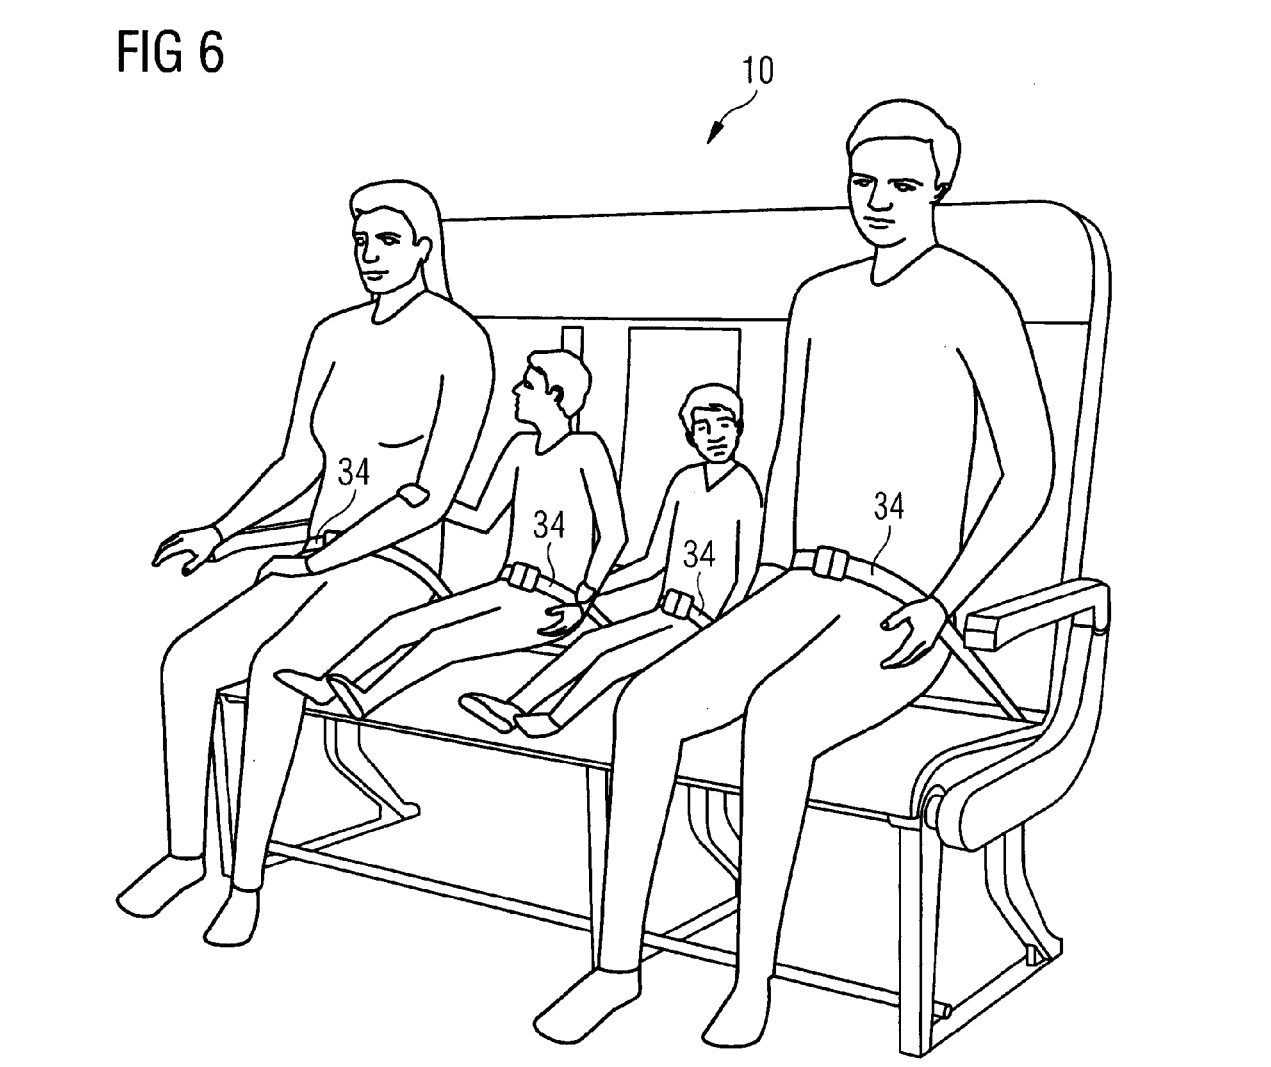 Airbus Patents Adjustable Seats For People Of Every Size, In-Seat Storage That Eliminates All Legroom